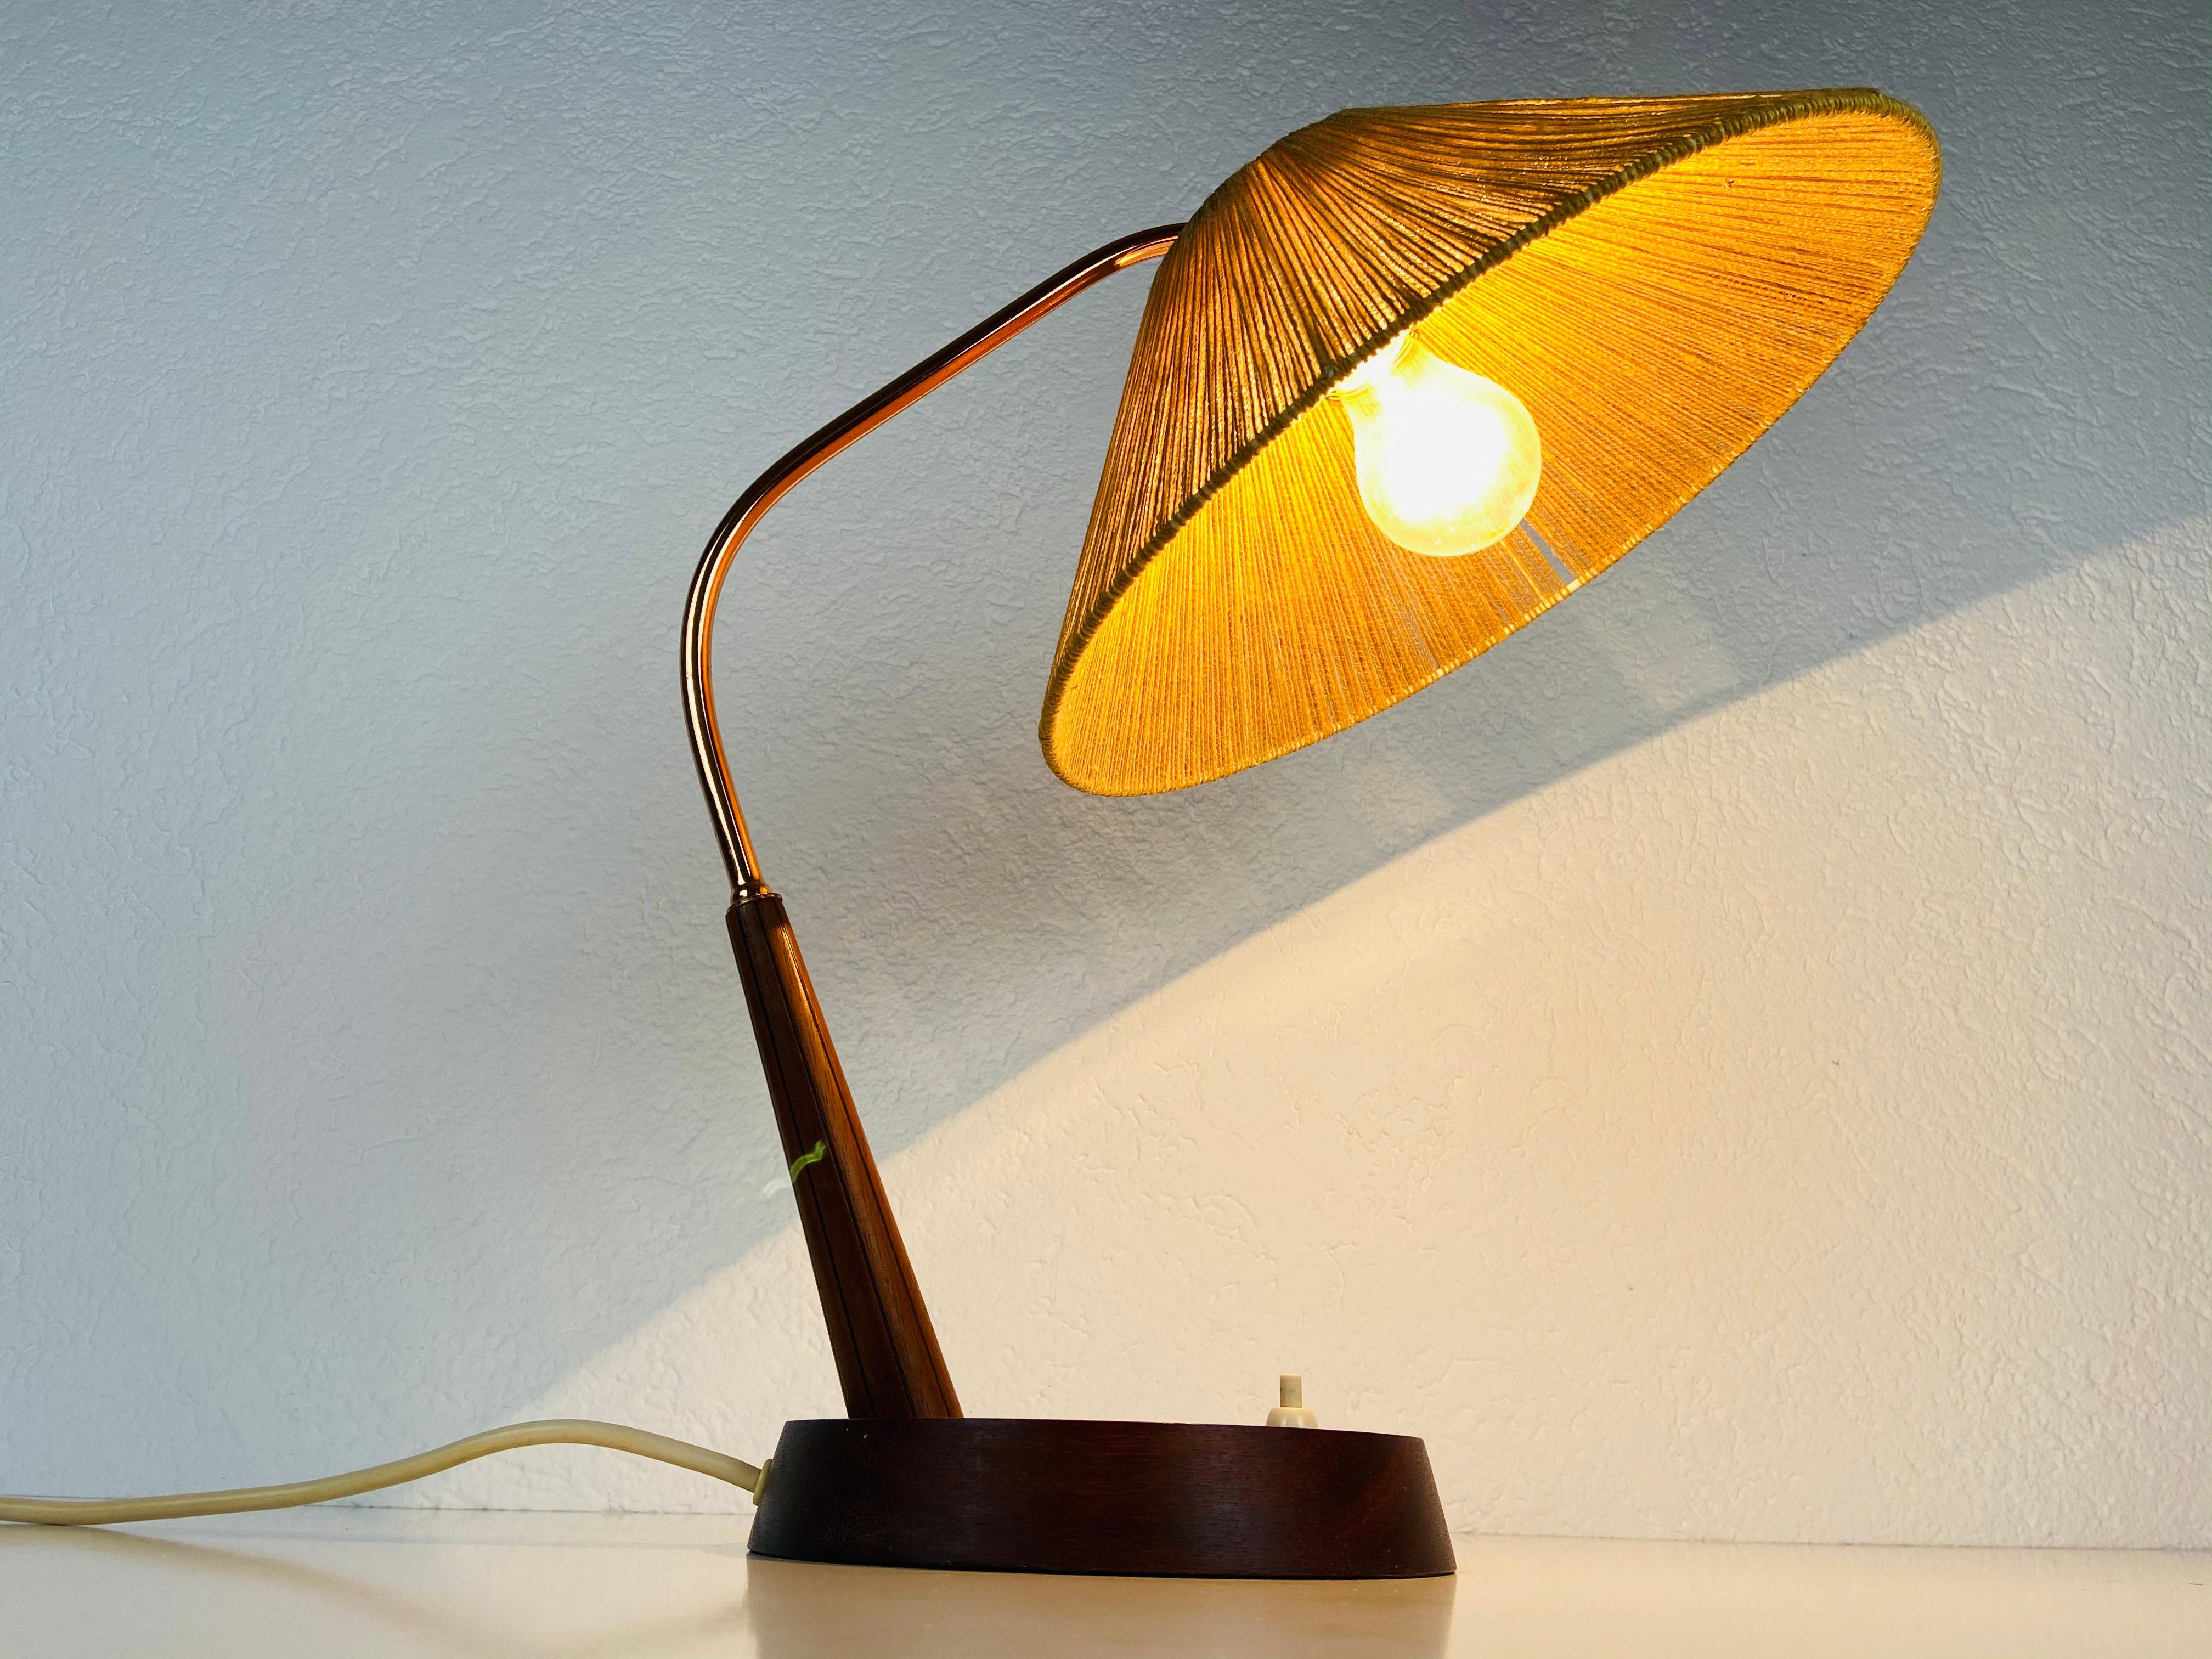 Midcentury Teak and Rattan Table Lamp by Temde, circa 1970 For Sale 6